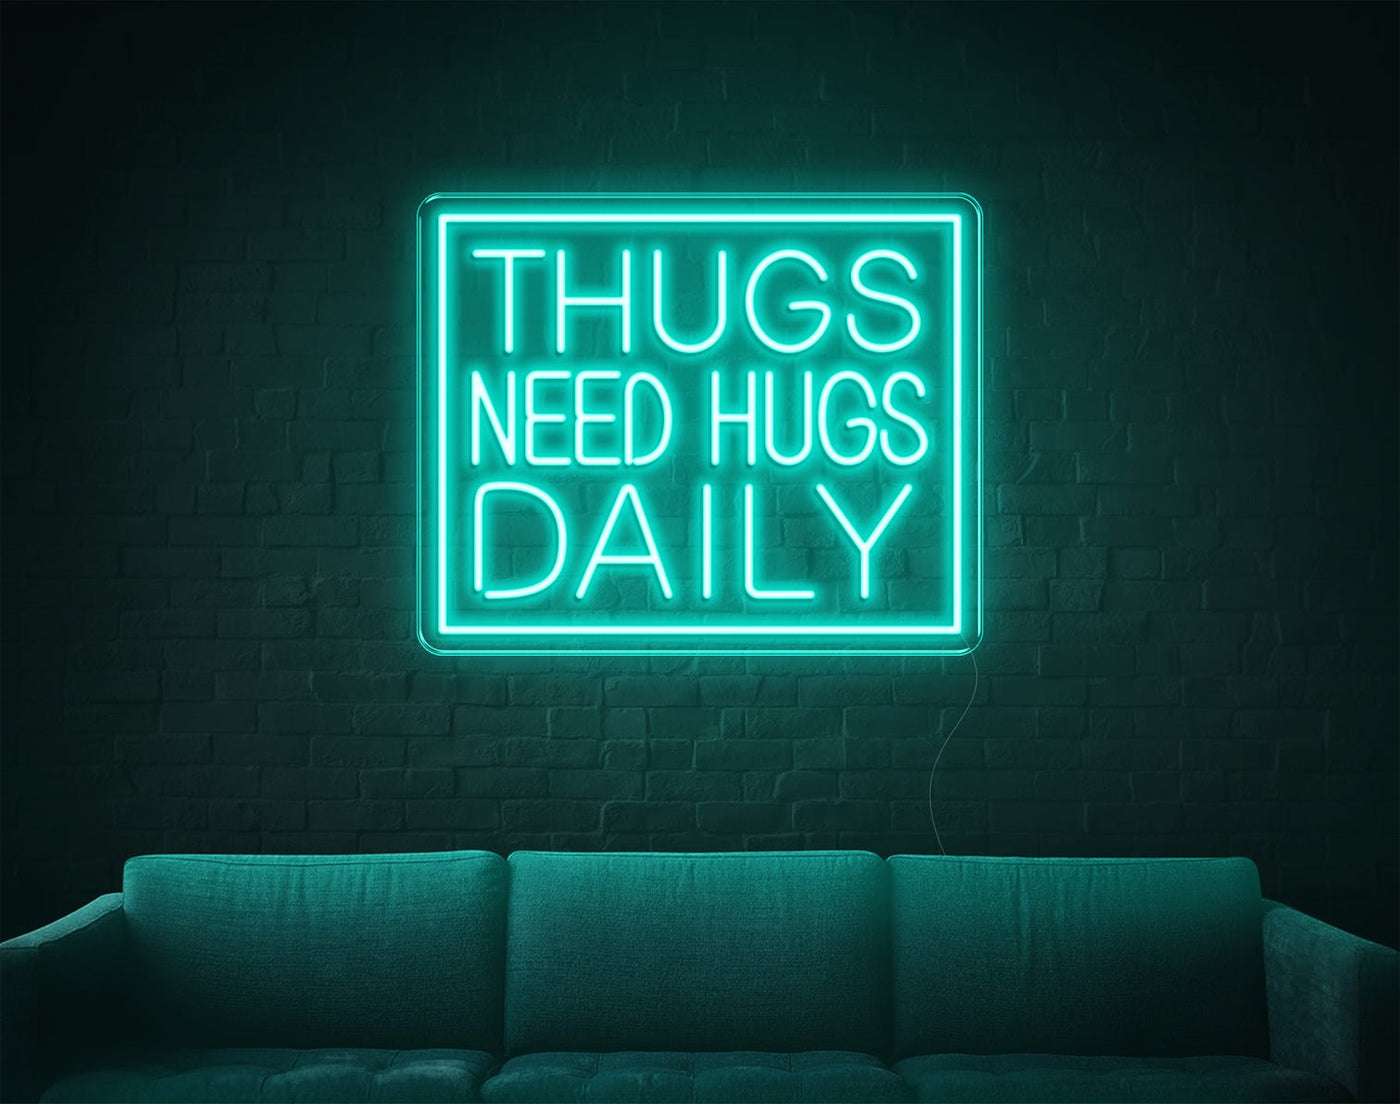 Thugs Need Hugs Daily LED Neon Sign - 18inch x 22inchTurquoise